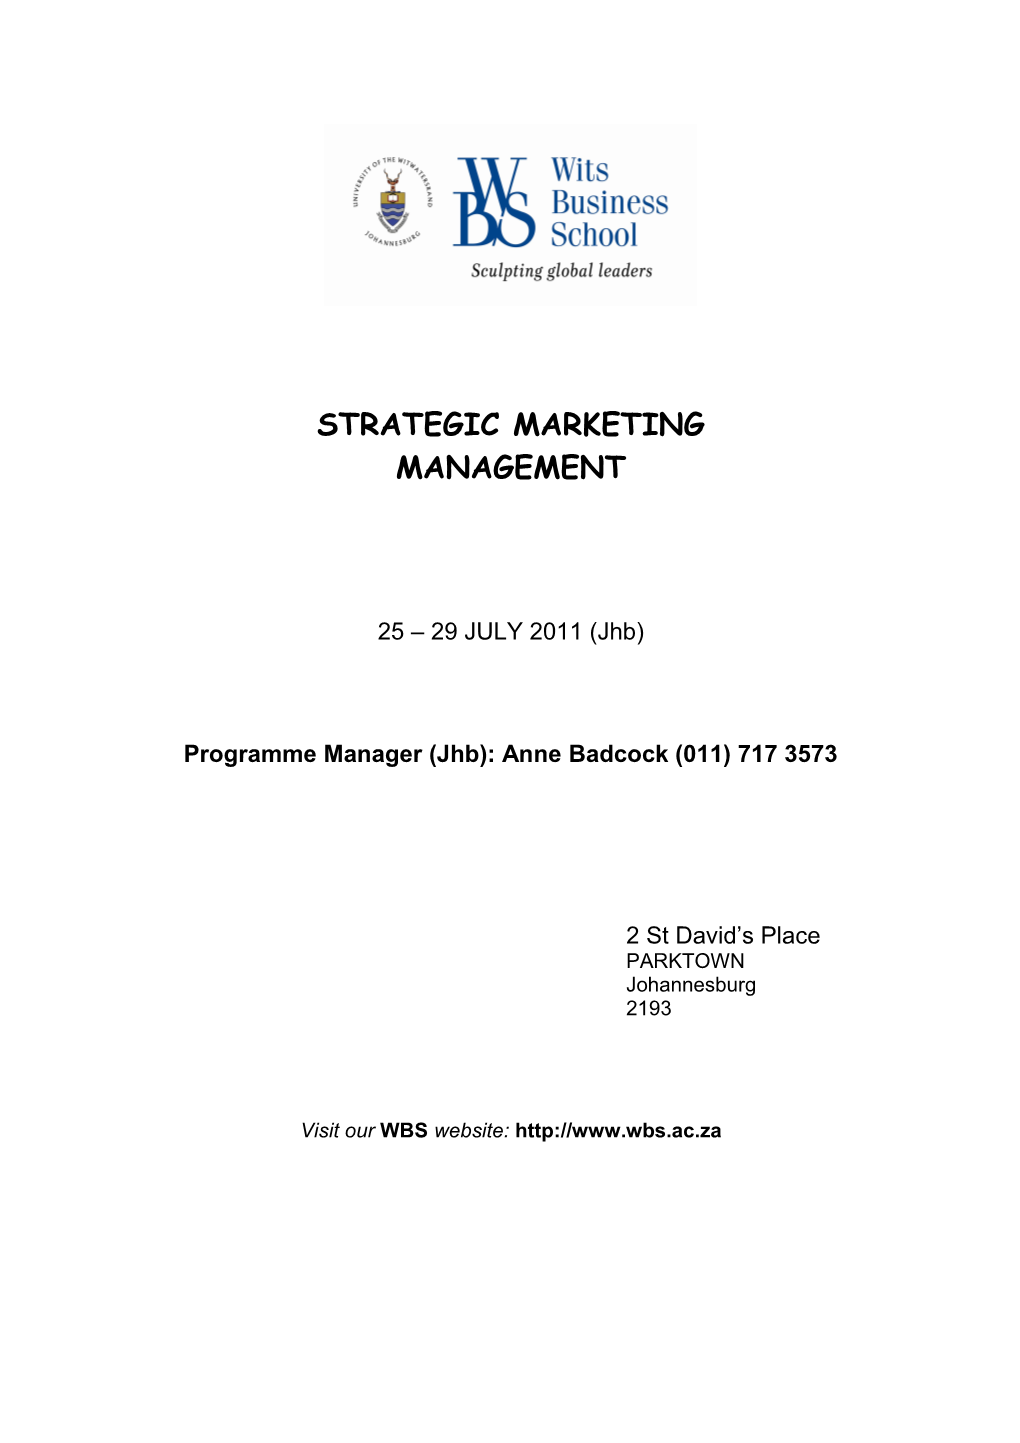 Programme Manager (Jhb): Anne Badcock (011) 717 3573